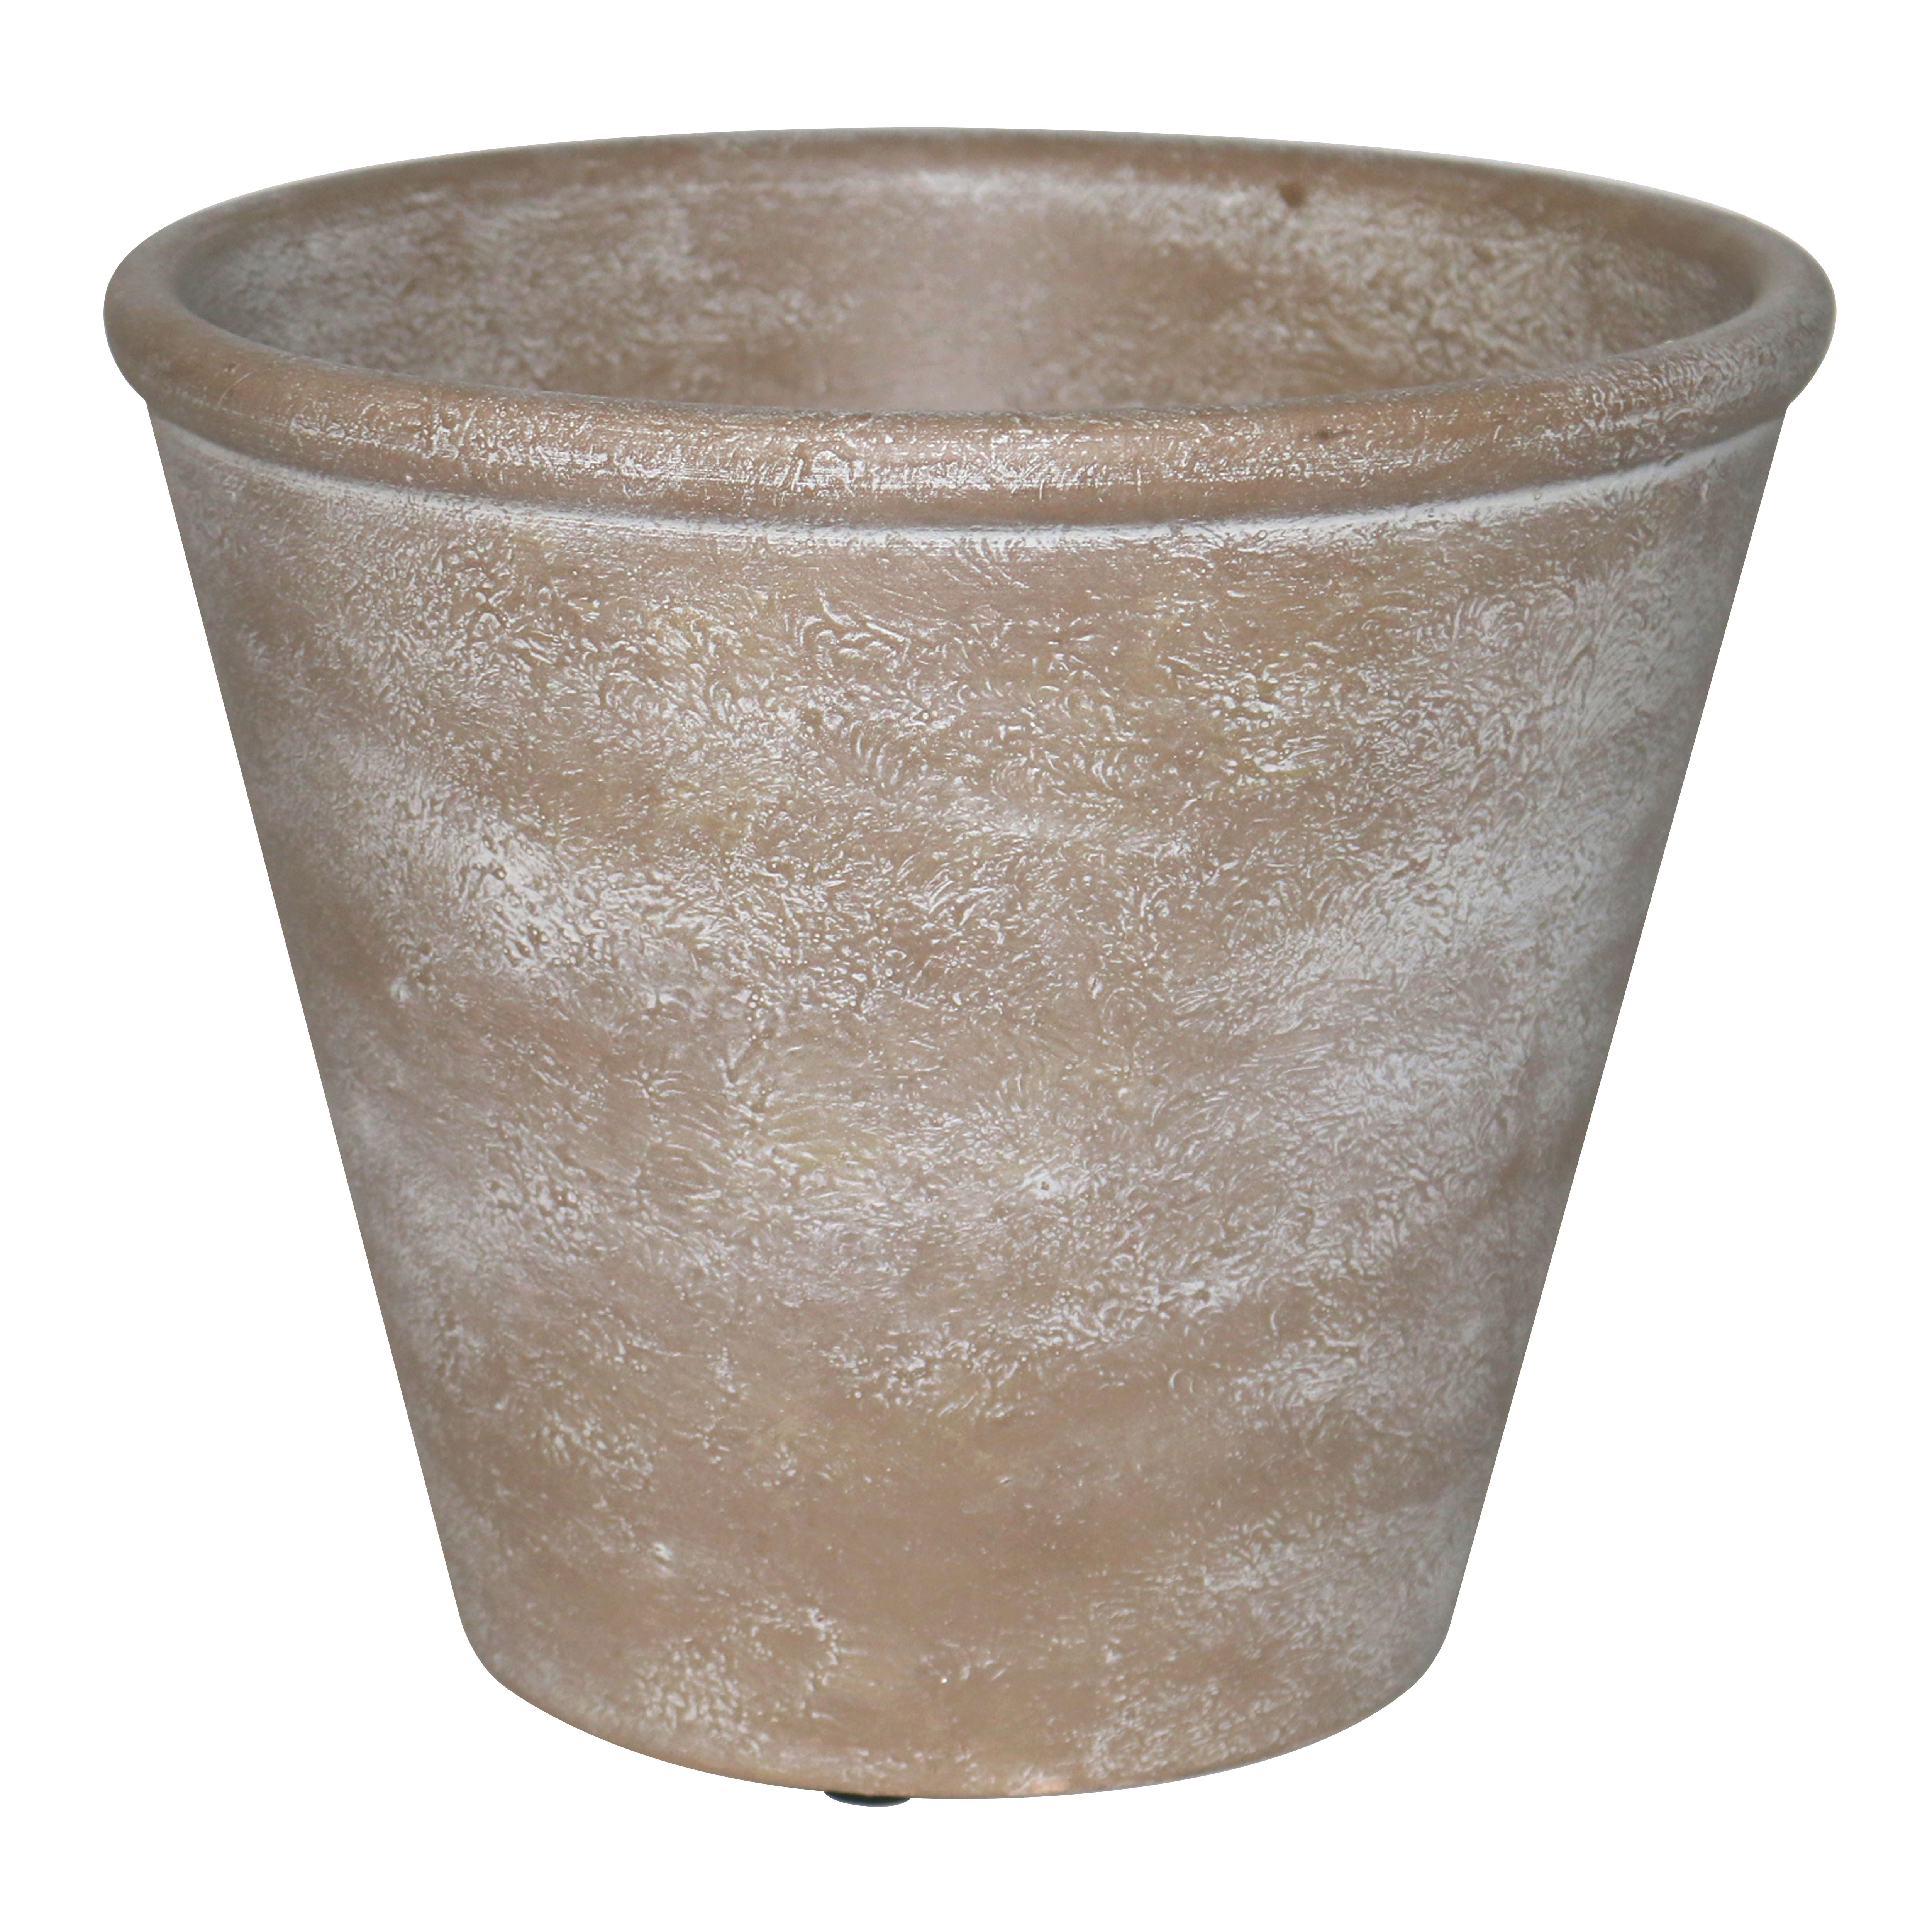 Better Homes&gardens 10 inch Hand-painted Brown Ceramic Pot - image 3 of 9